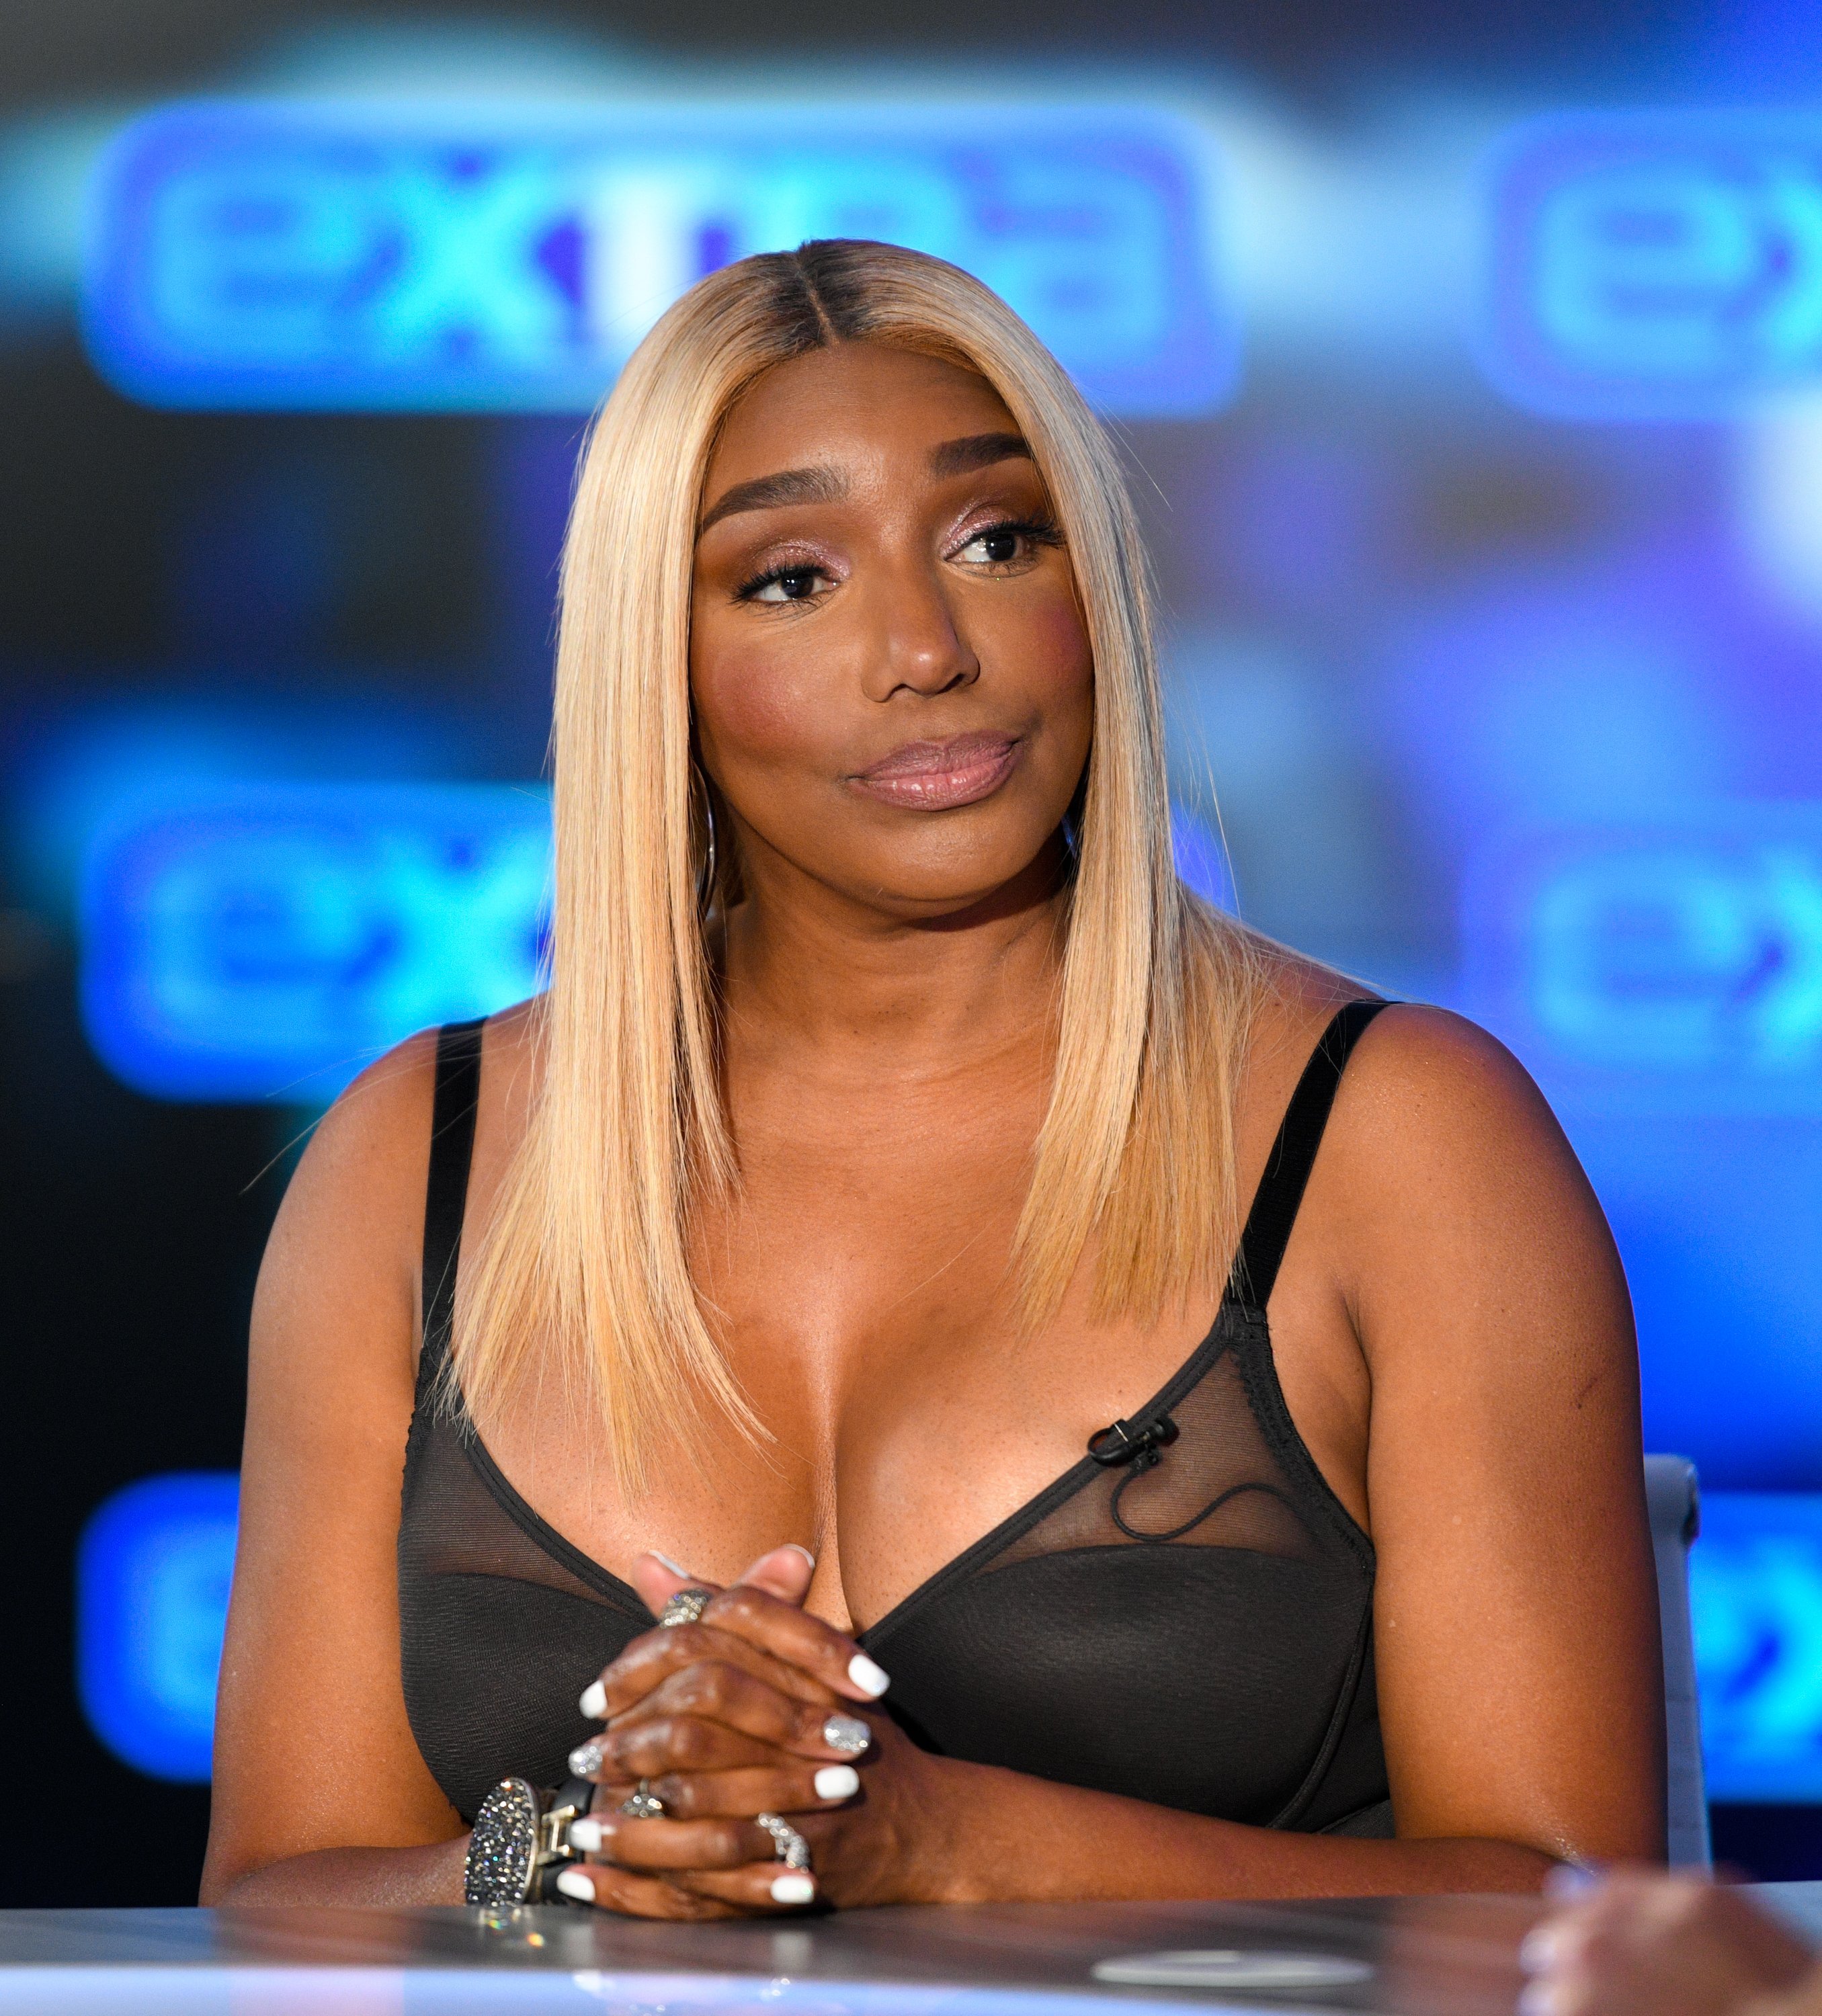 Nene Leakes on the set of "Extra" in November 2019. | Photo: Getty Images